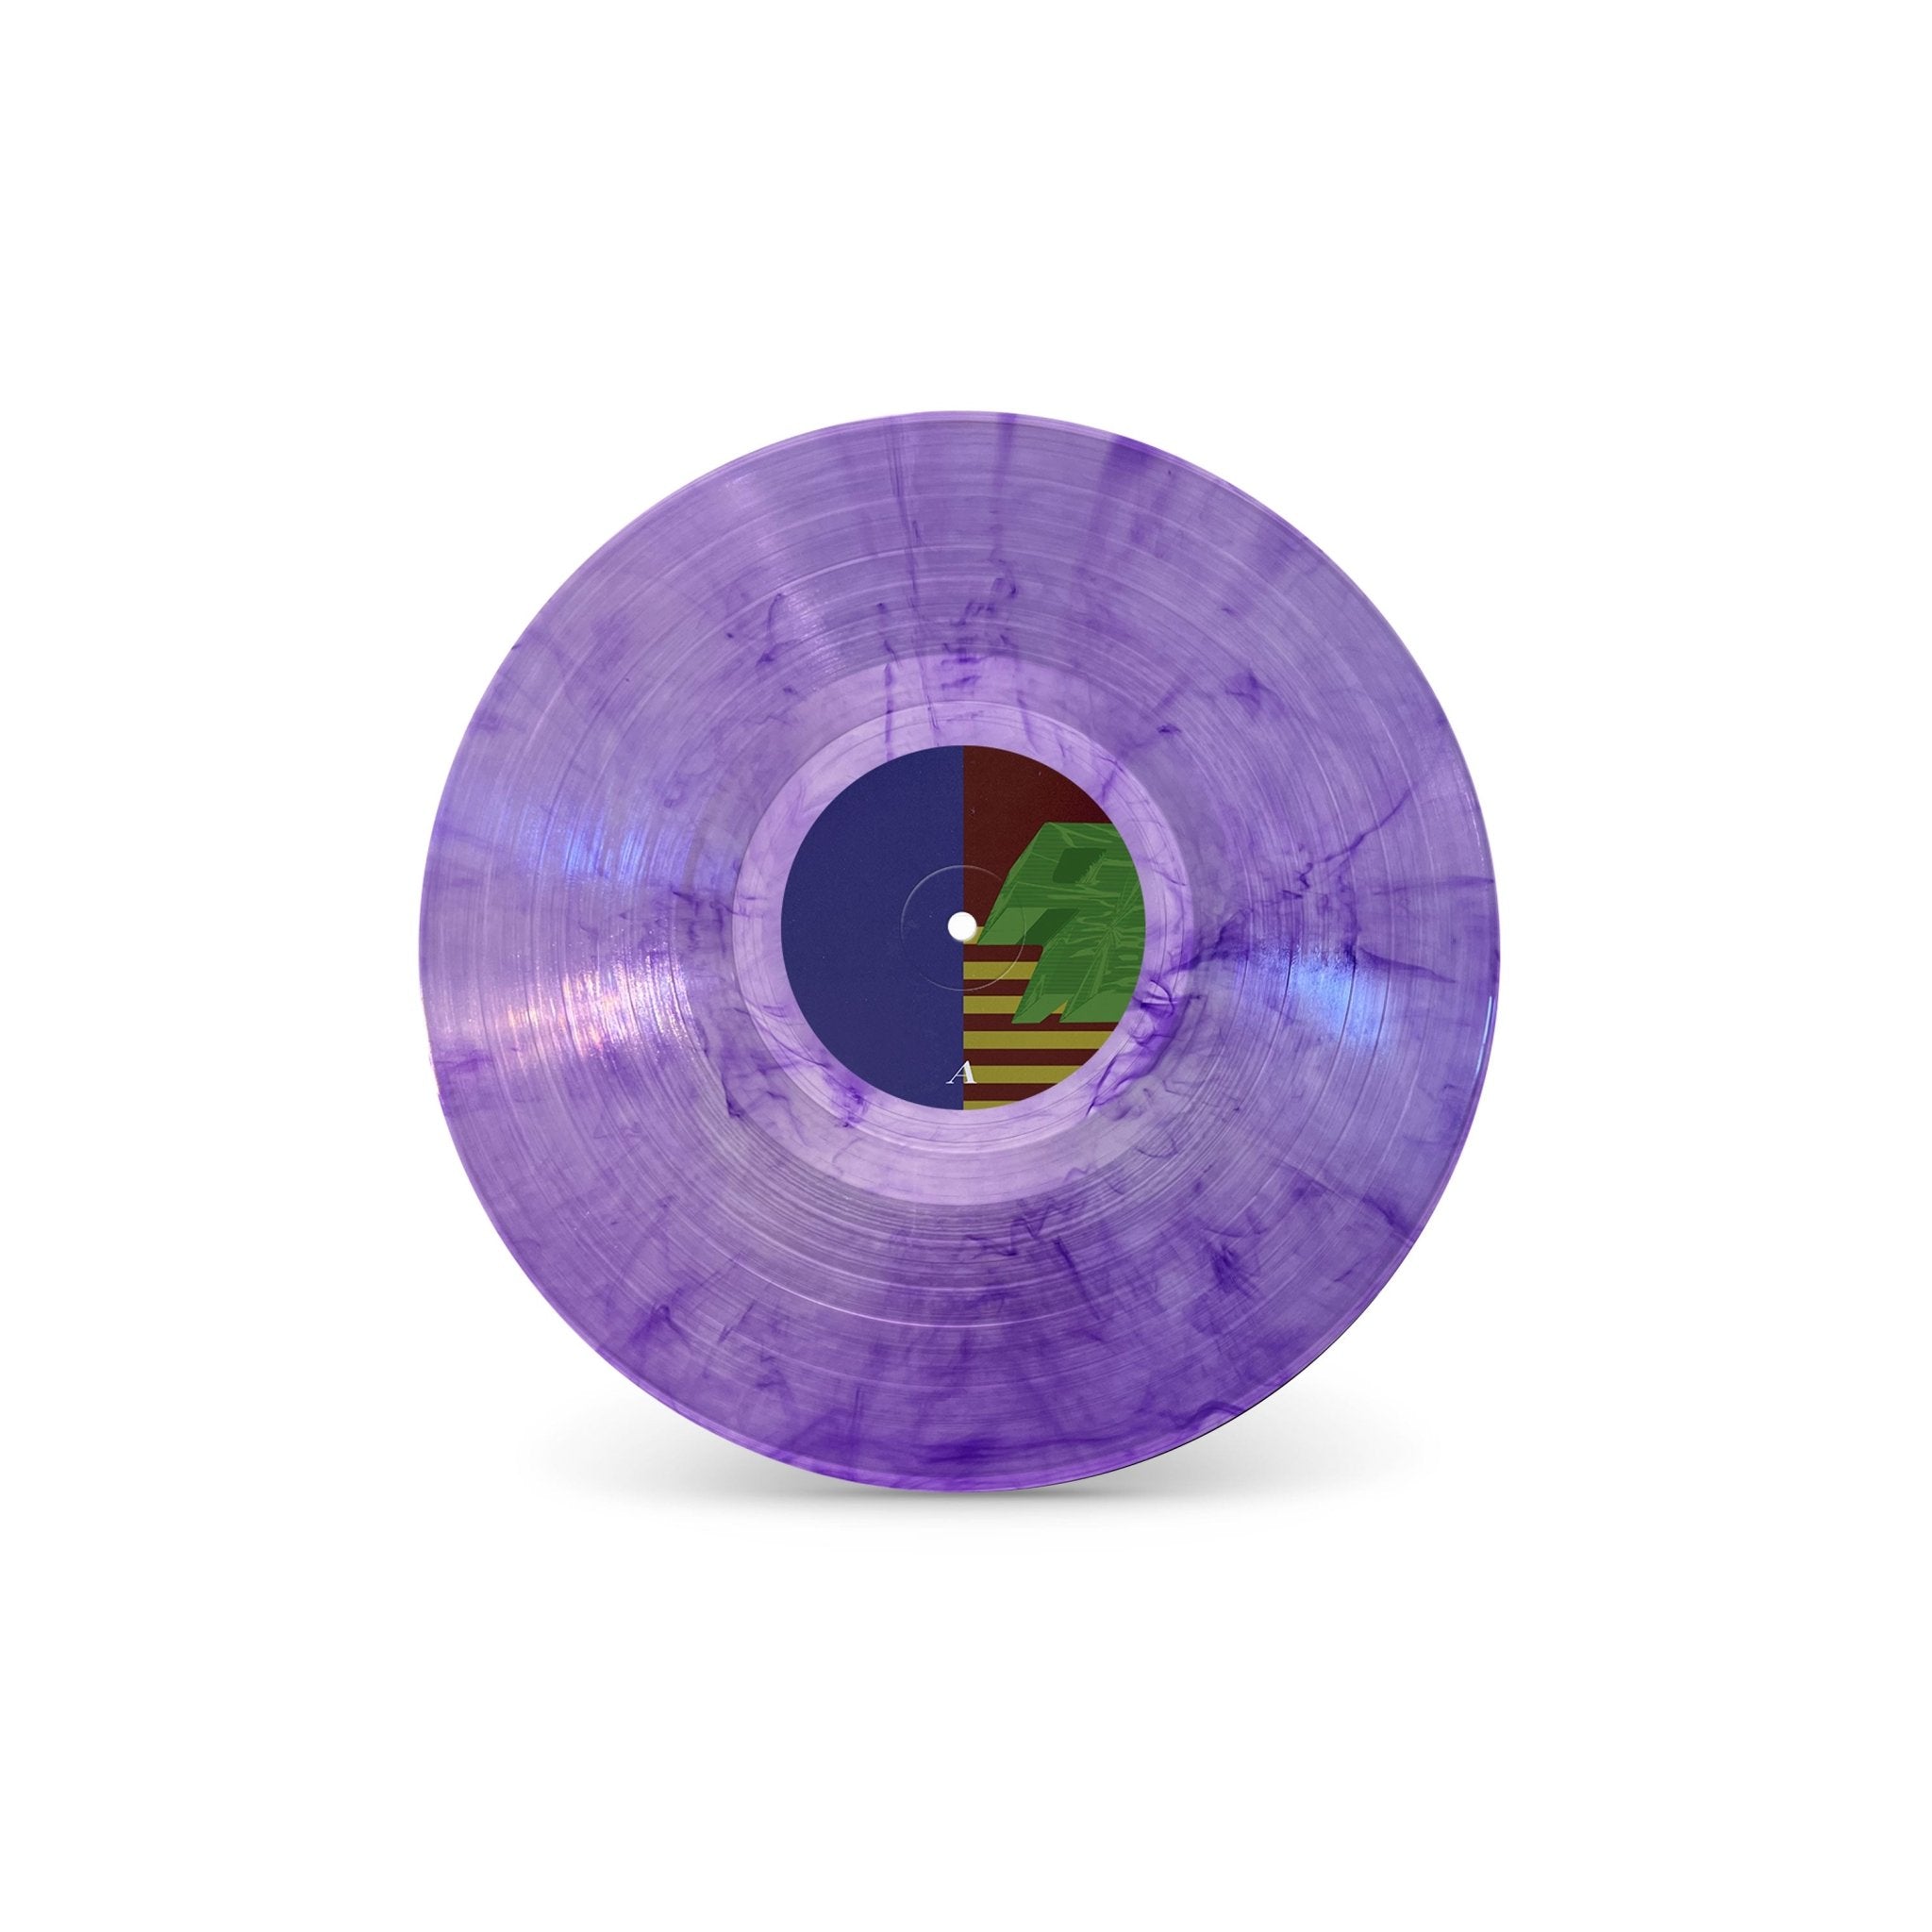 Windows 96 - Enchanted Instrumentals and Whispers LP on Purple Marble Vinyl - 100% Electronica Official Store (Photo 2)